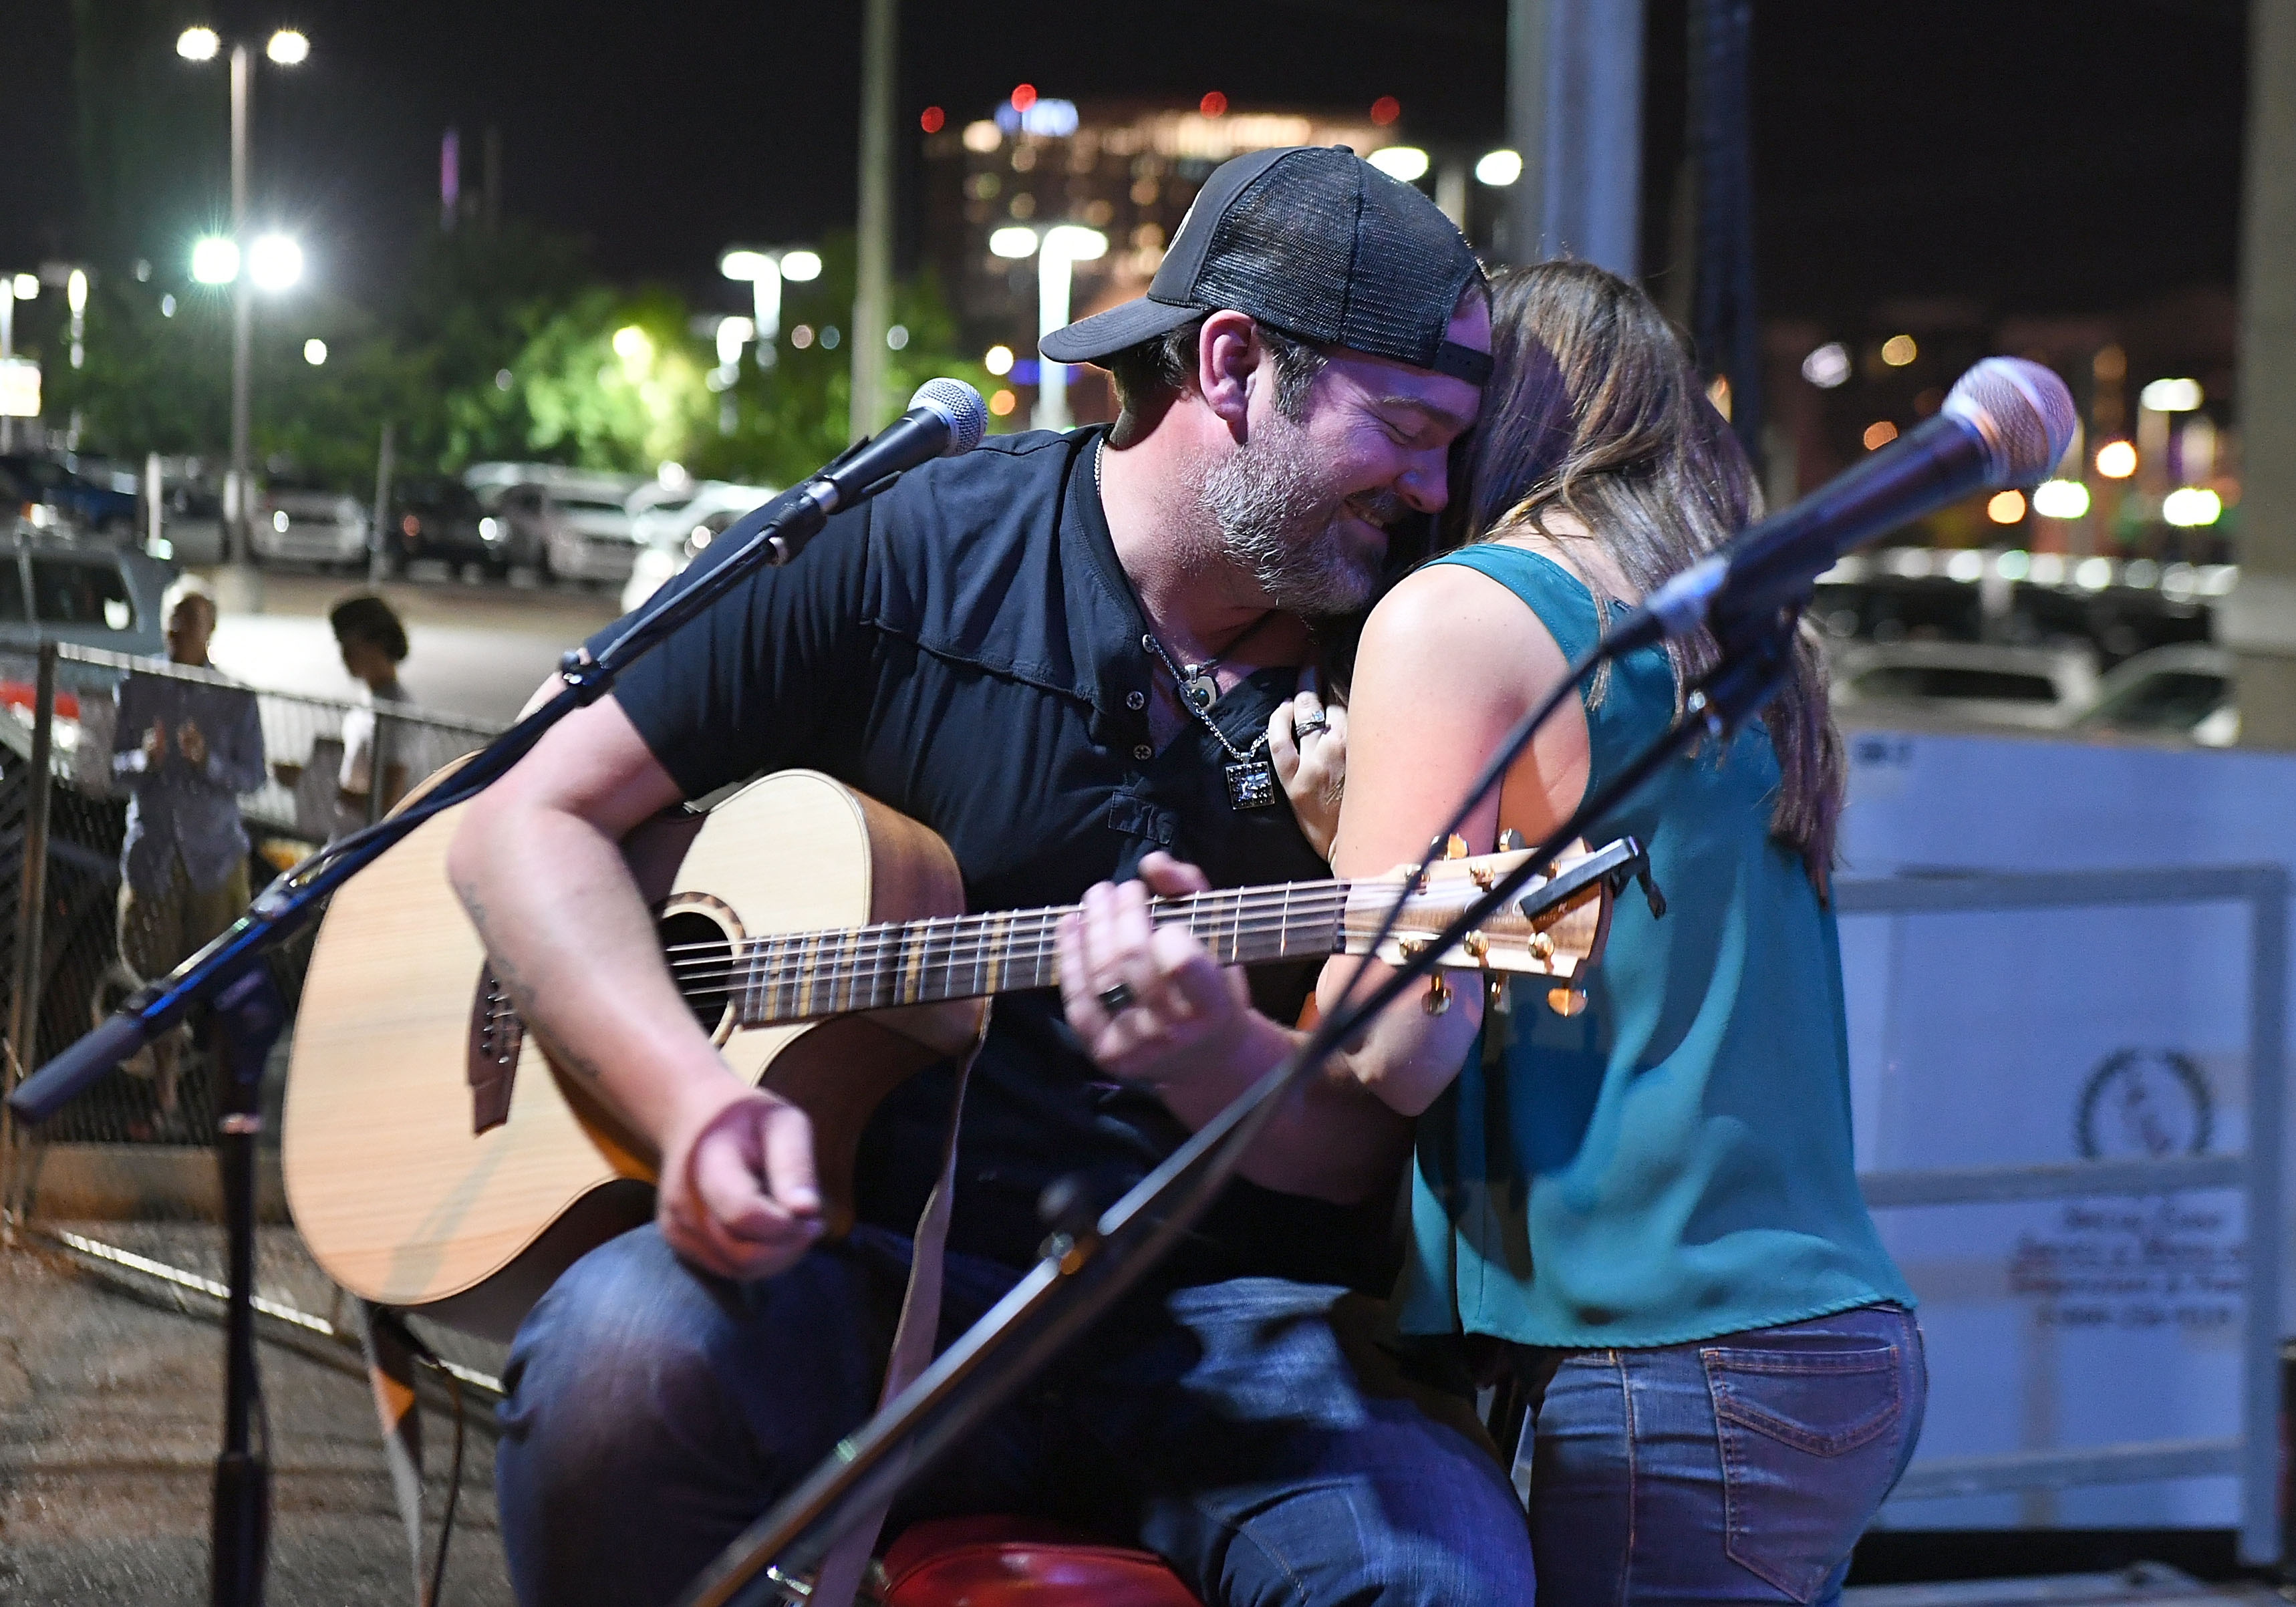 Lee Brice embraces his wife Sara Reeveley after serenading her during Lewispalooza on June 5, 2018 in Nashville. | Source: Getty Images